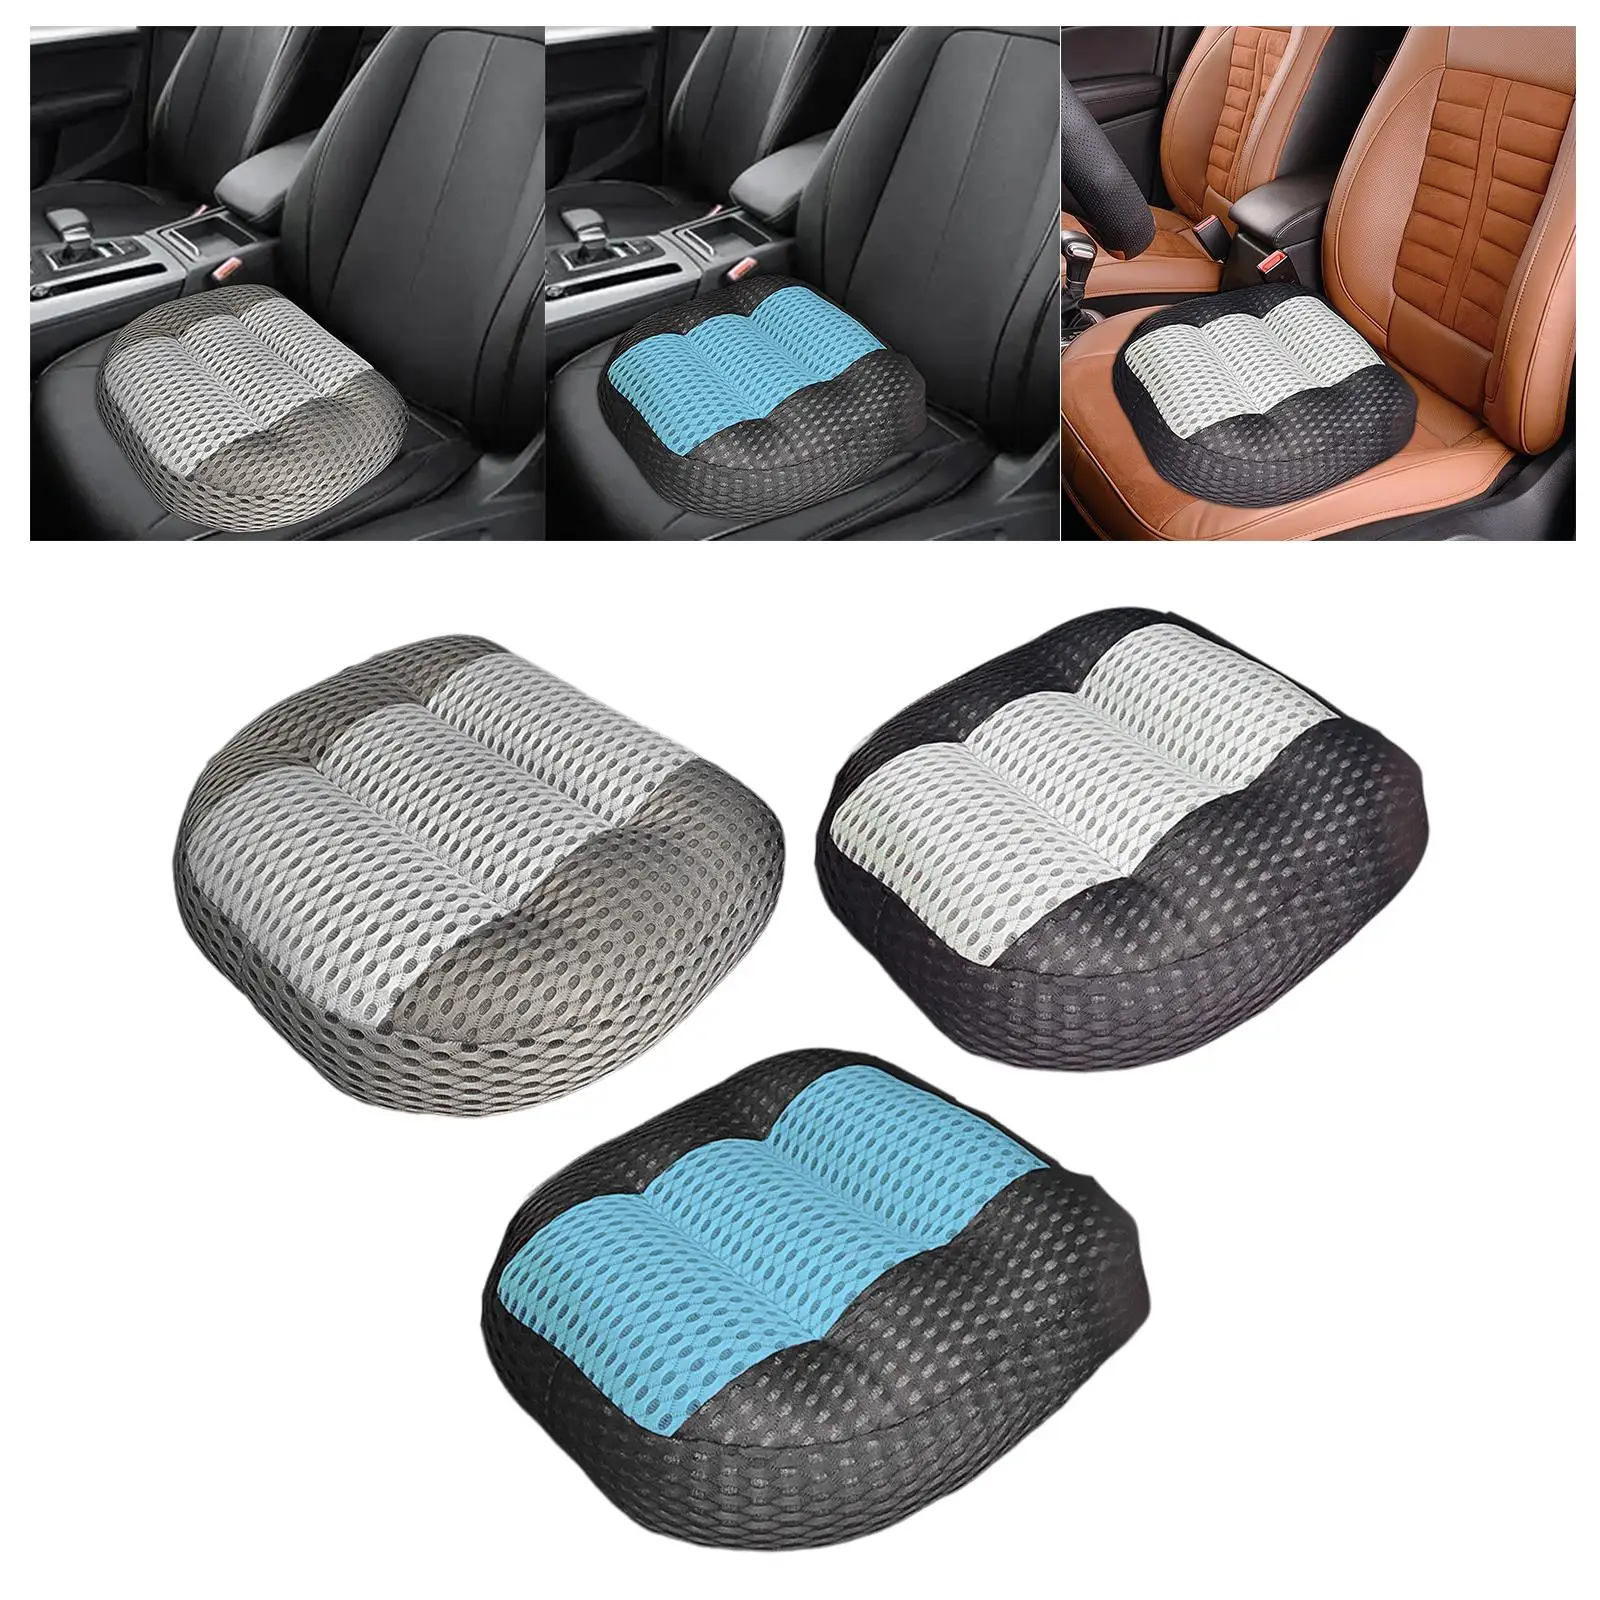 https://ae01.alicdn.com/kf/S3b1eaf7b5714418494a18c844f9aeb32q/Car-Booster-Seat-Cushion-Portable-Nonslip-for-Short-Drivers-People-Office-Chair.jpg